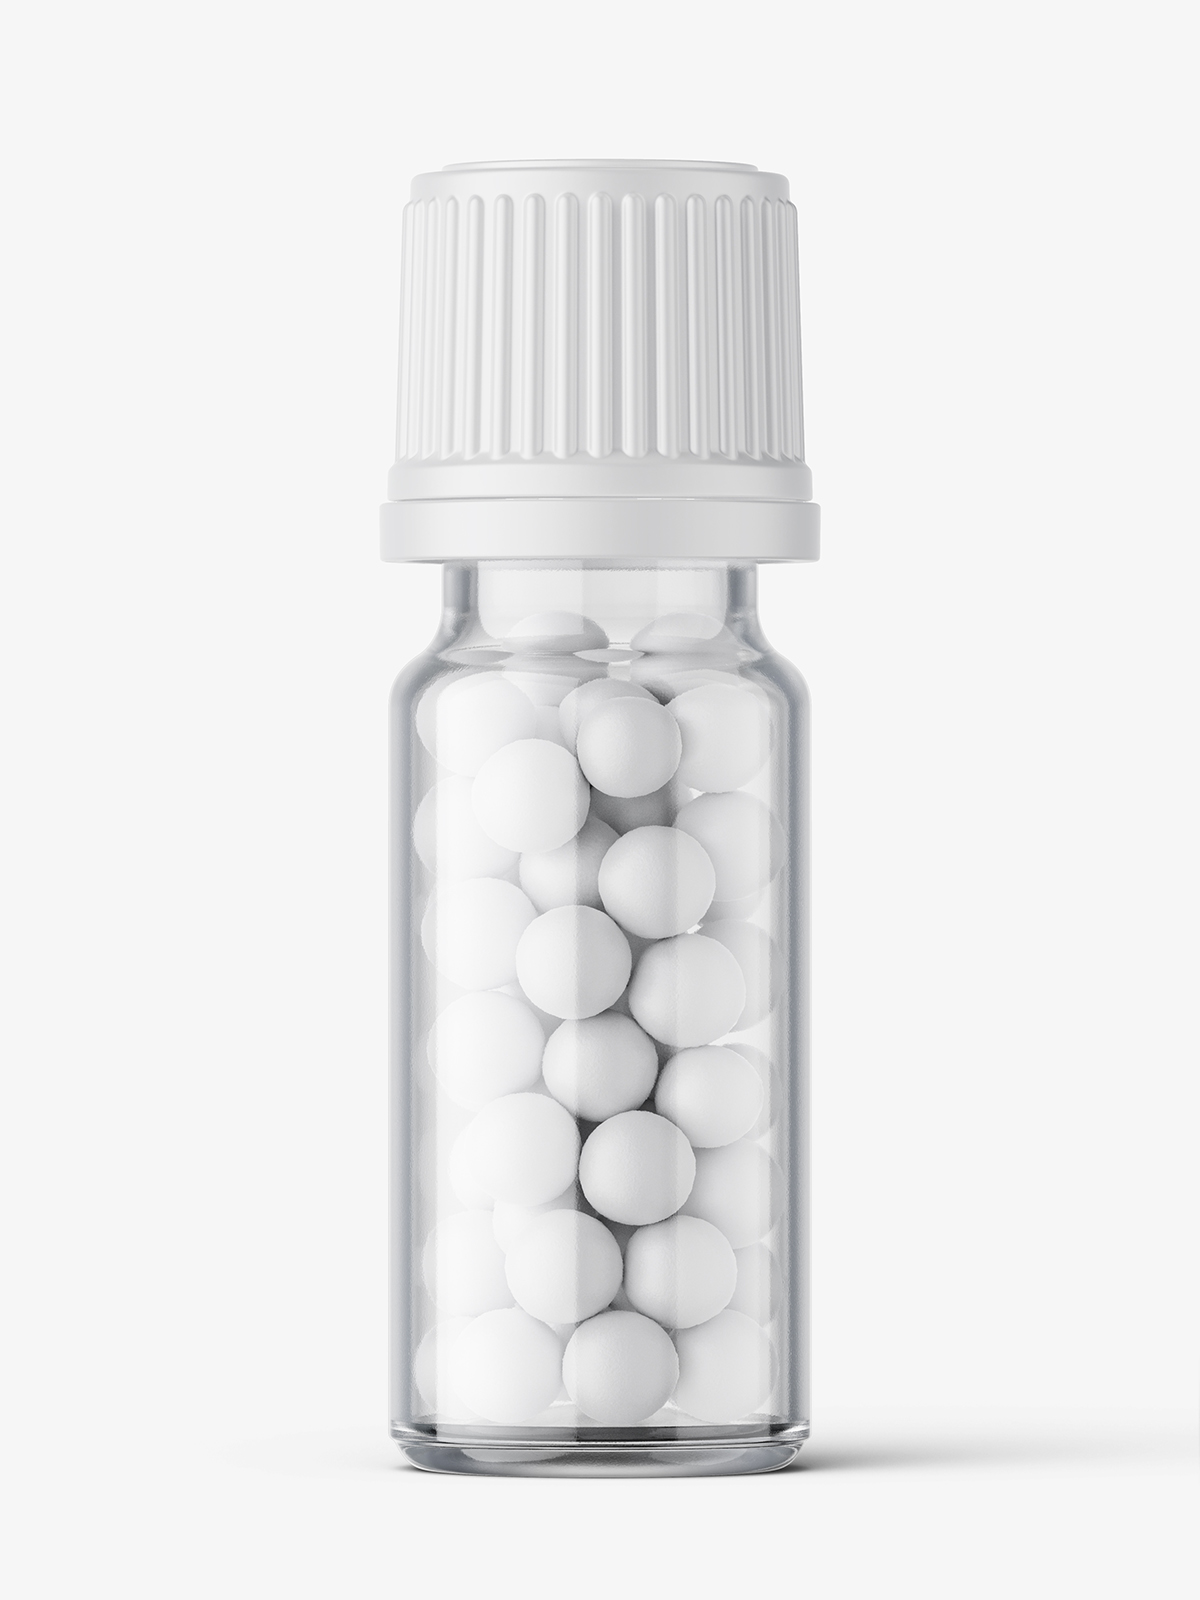 Download Clear bottle with pills mockup / 10 ml - Smarty Mockups